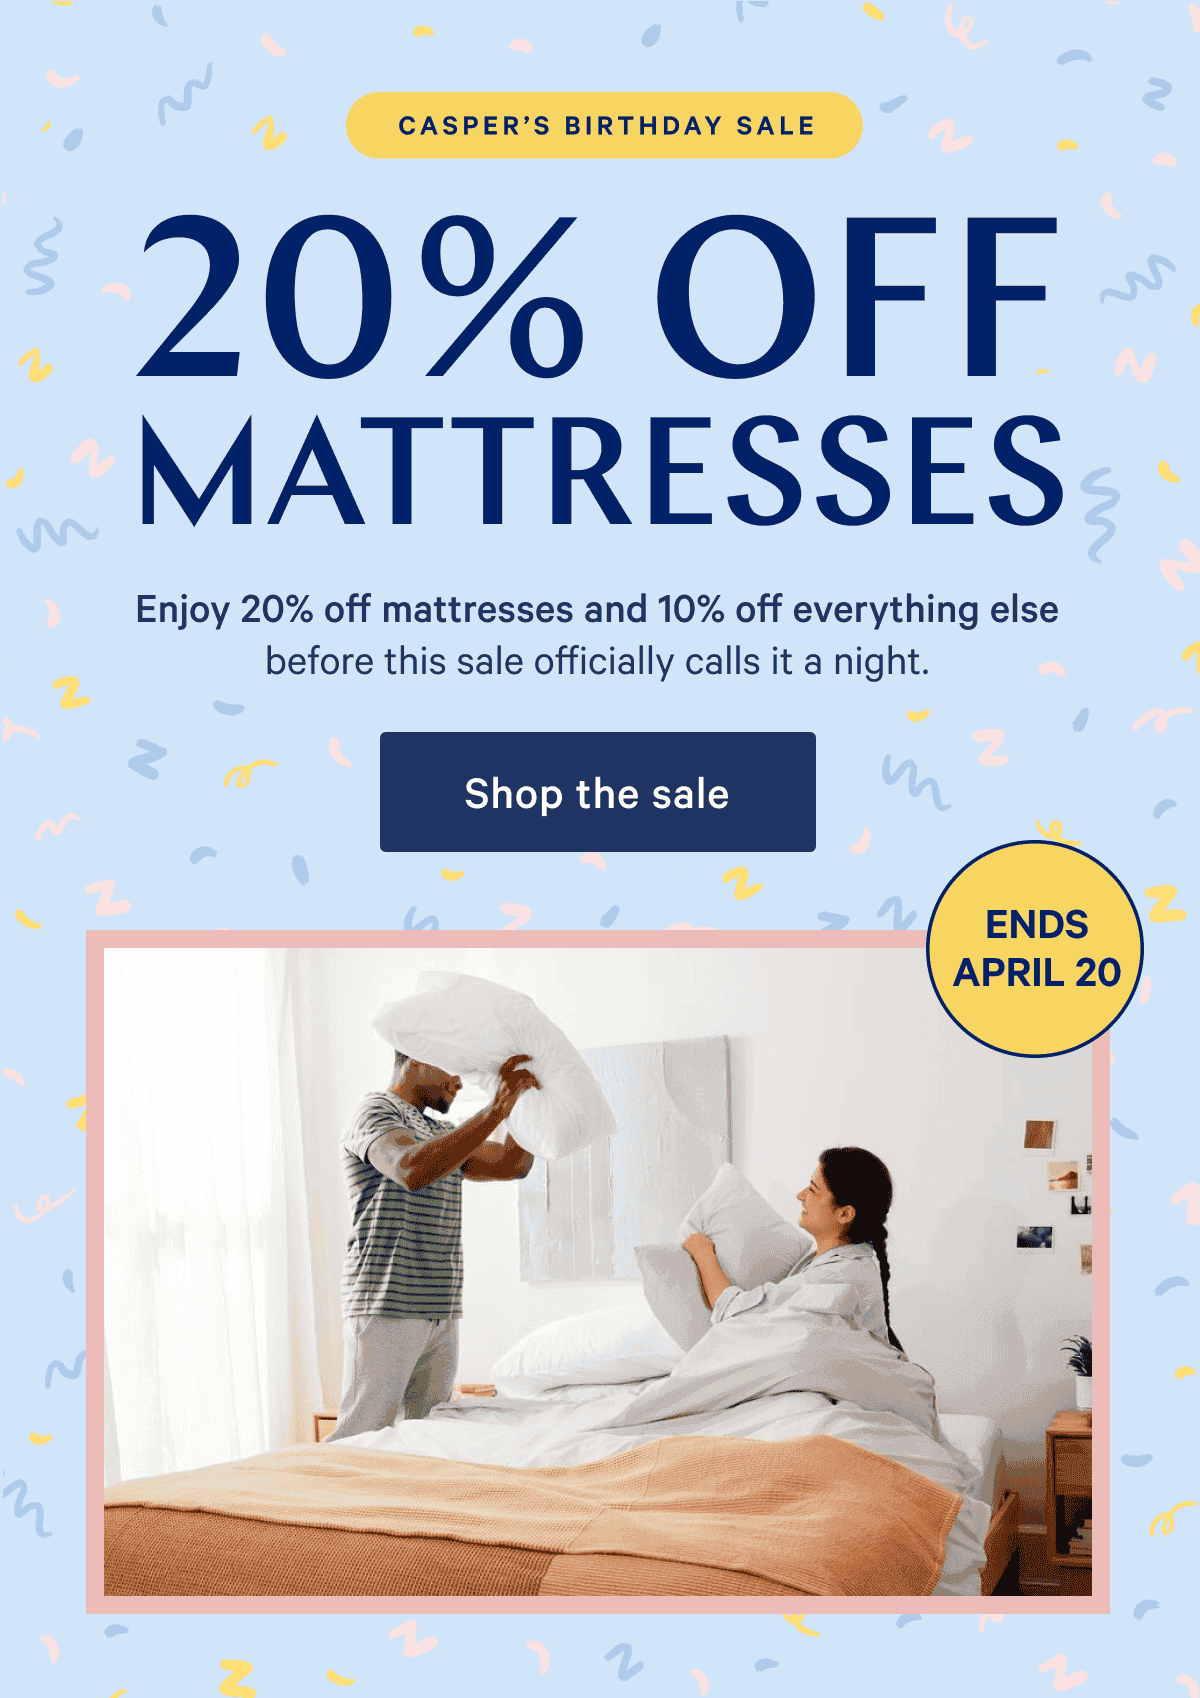 Enjoy 20% off mattresses and 10% off everything else before this sale officially calls it a night.